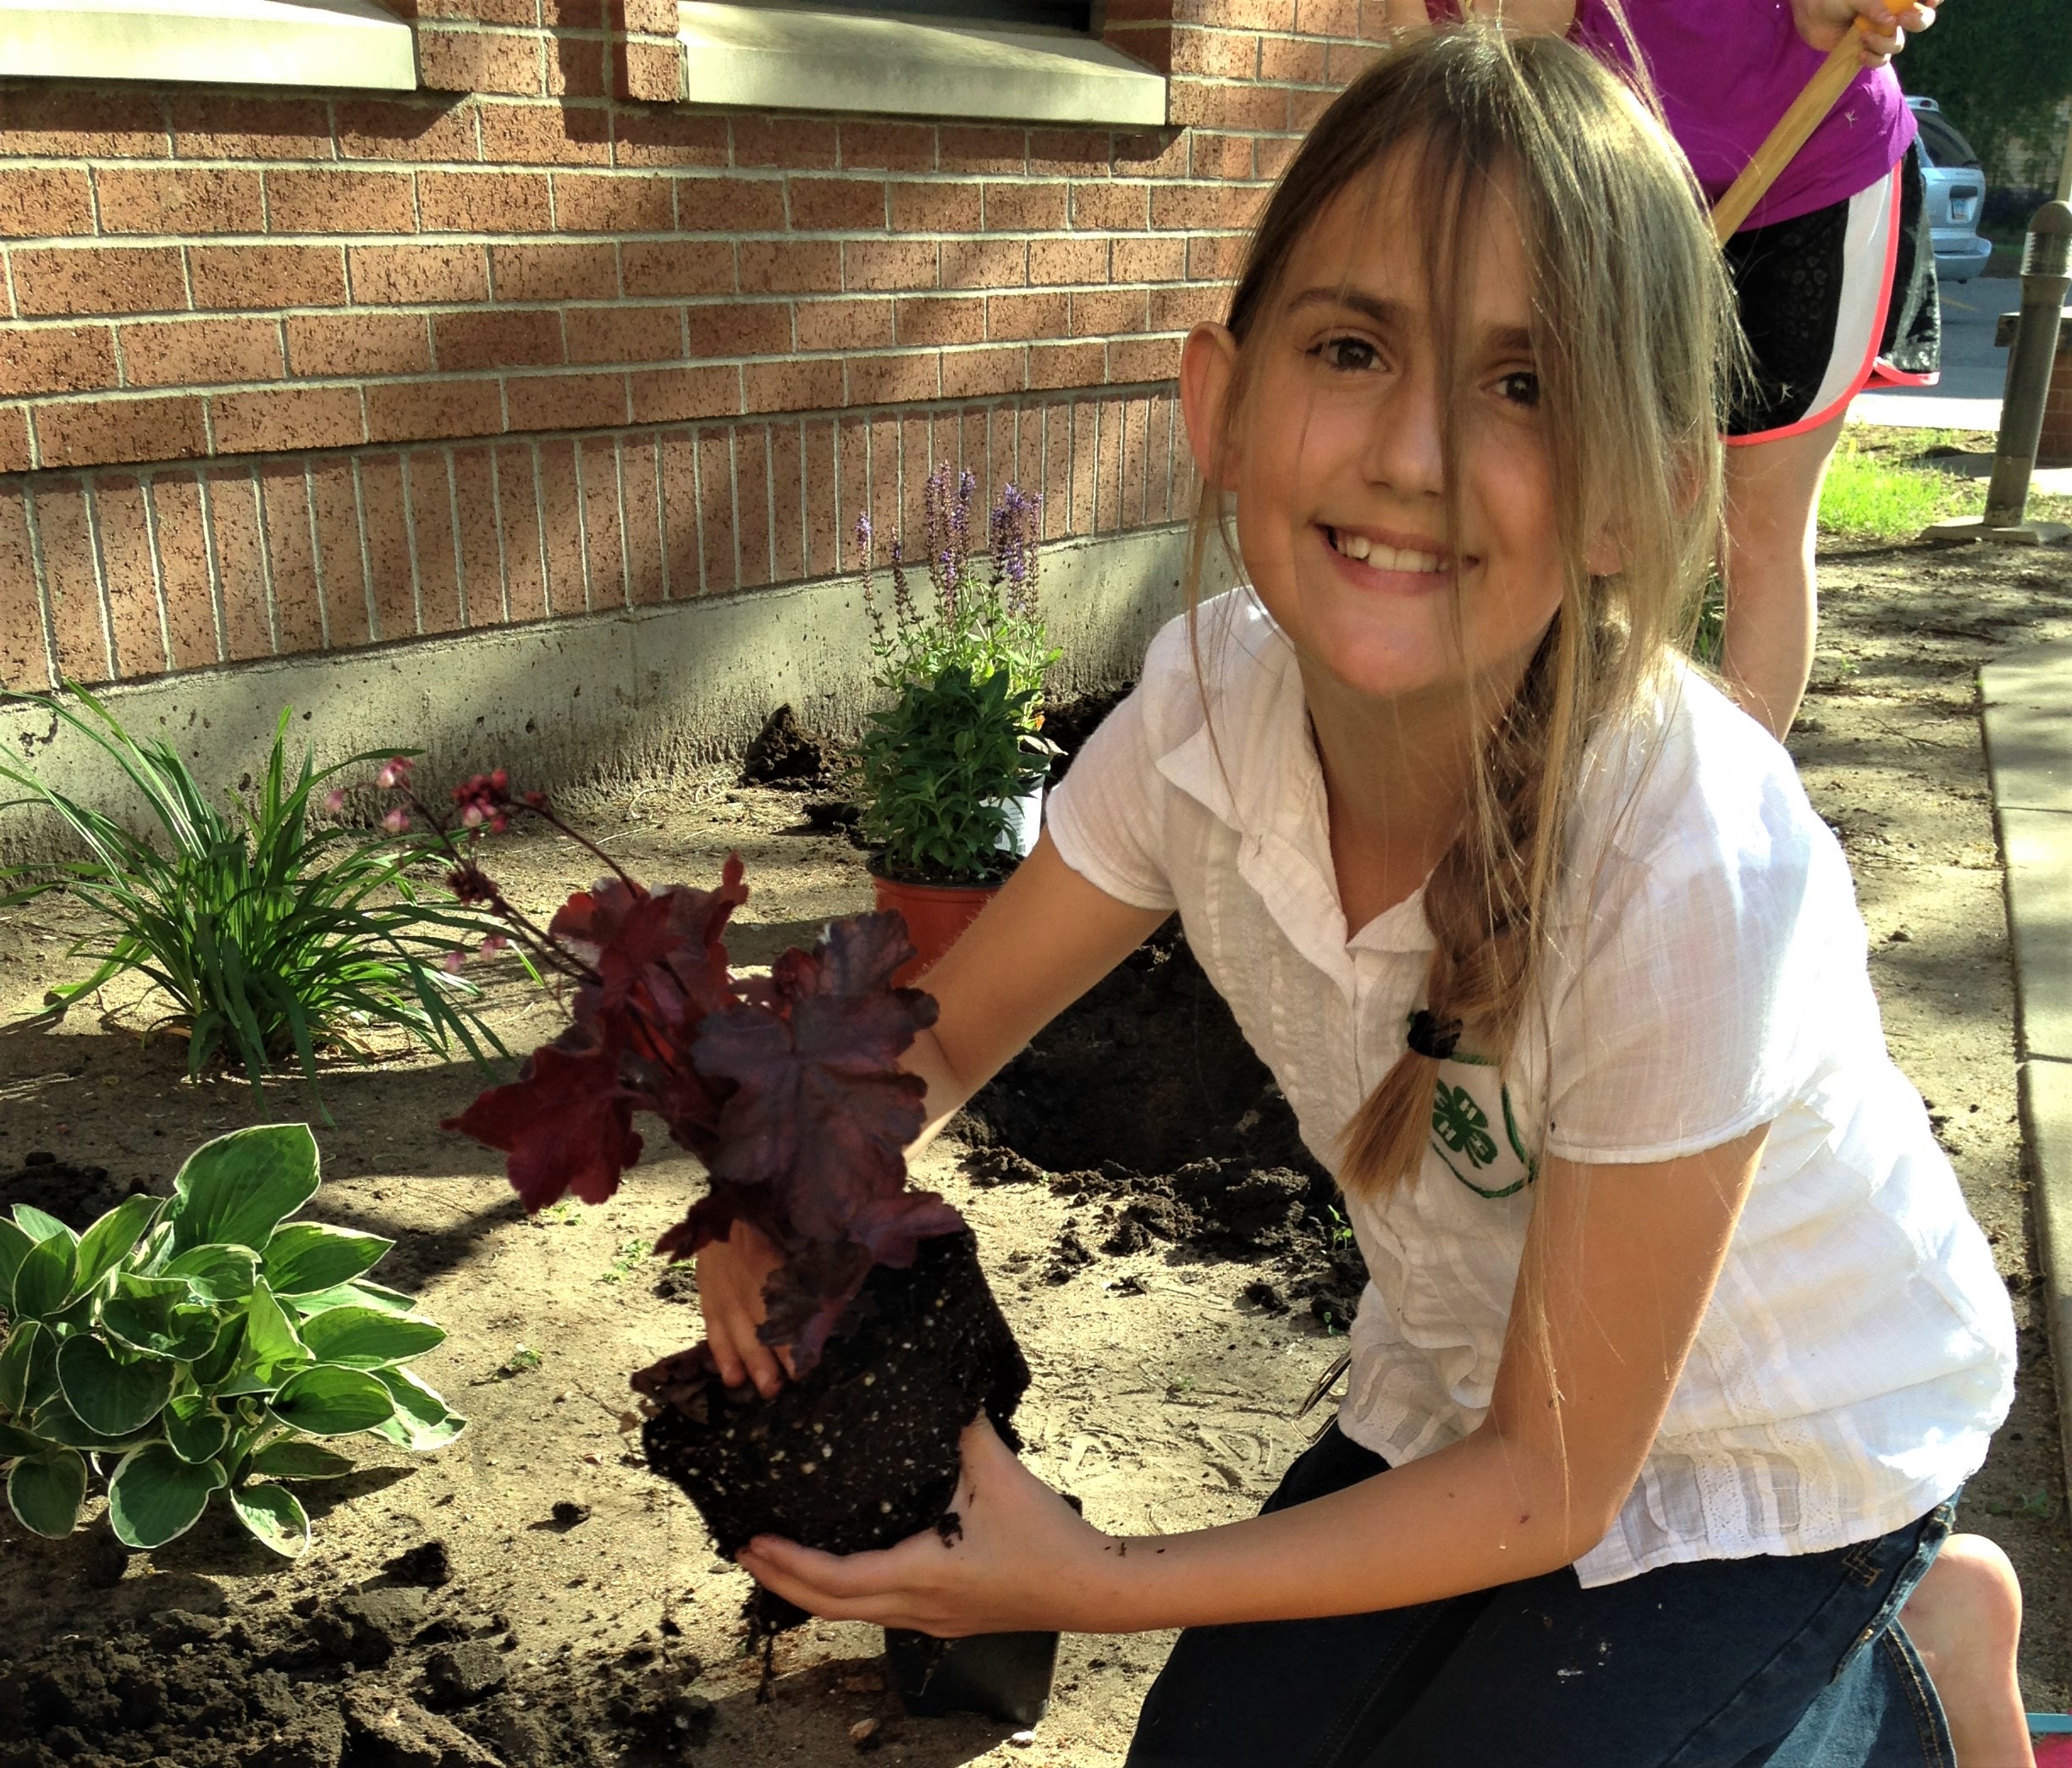 More than 3,300 youth participated in Junior Master Gardener projects in 2022. (NDSU photo)